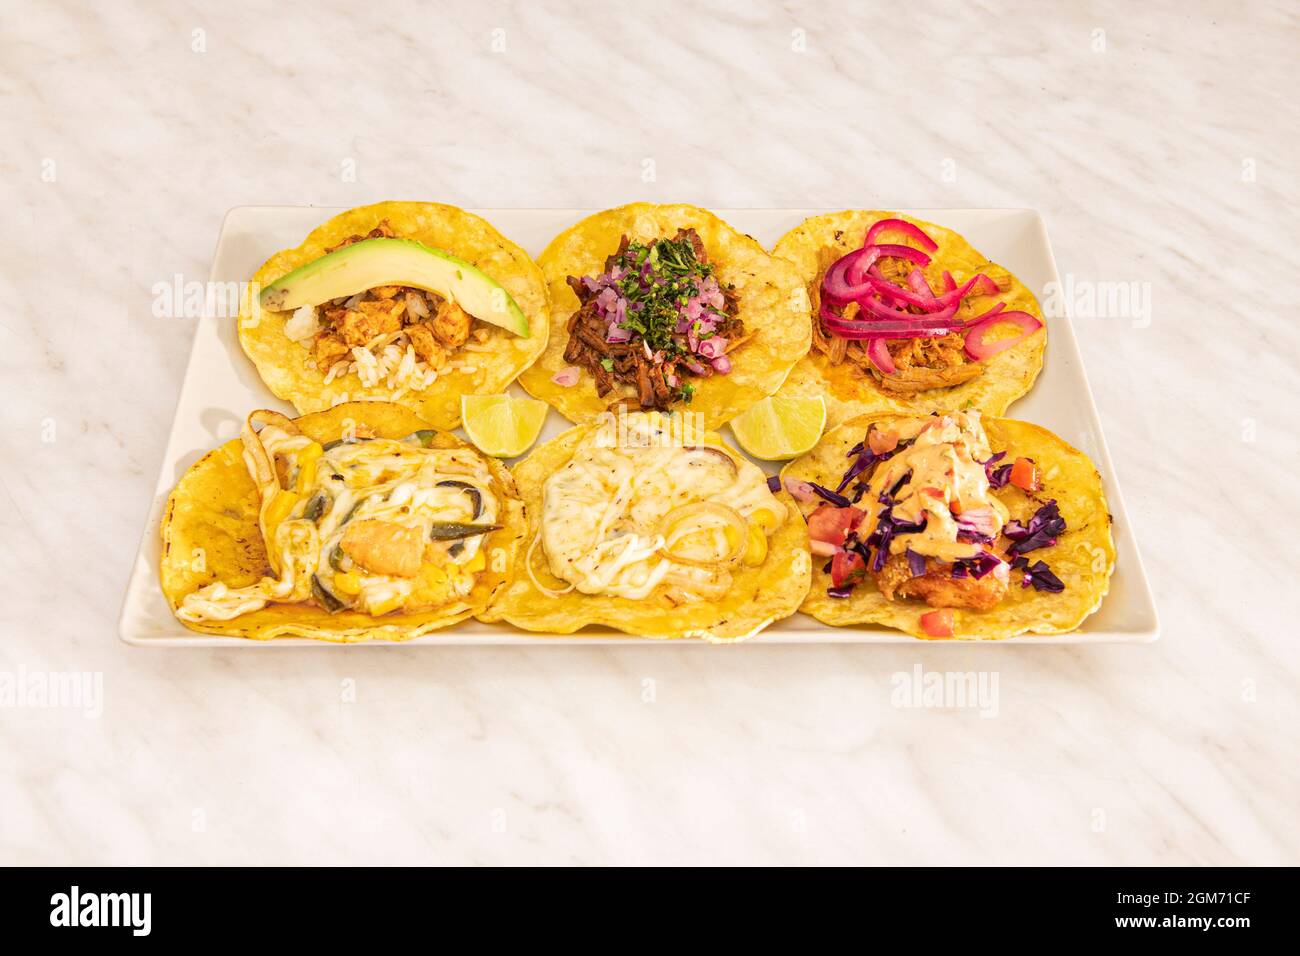 Tray of assorted tacos with corn tortillas, lots of melted cheese, purple onion, pulled pork, avocado, chicken tinga, nopales, birria Stock Photo